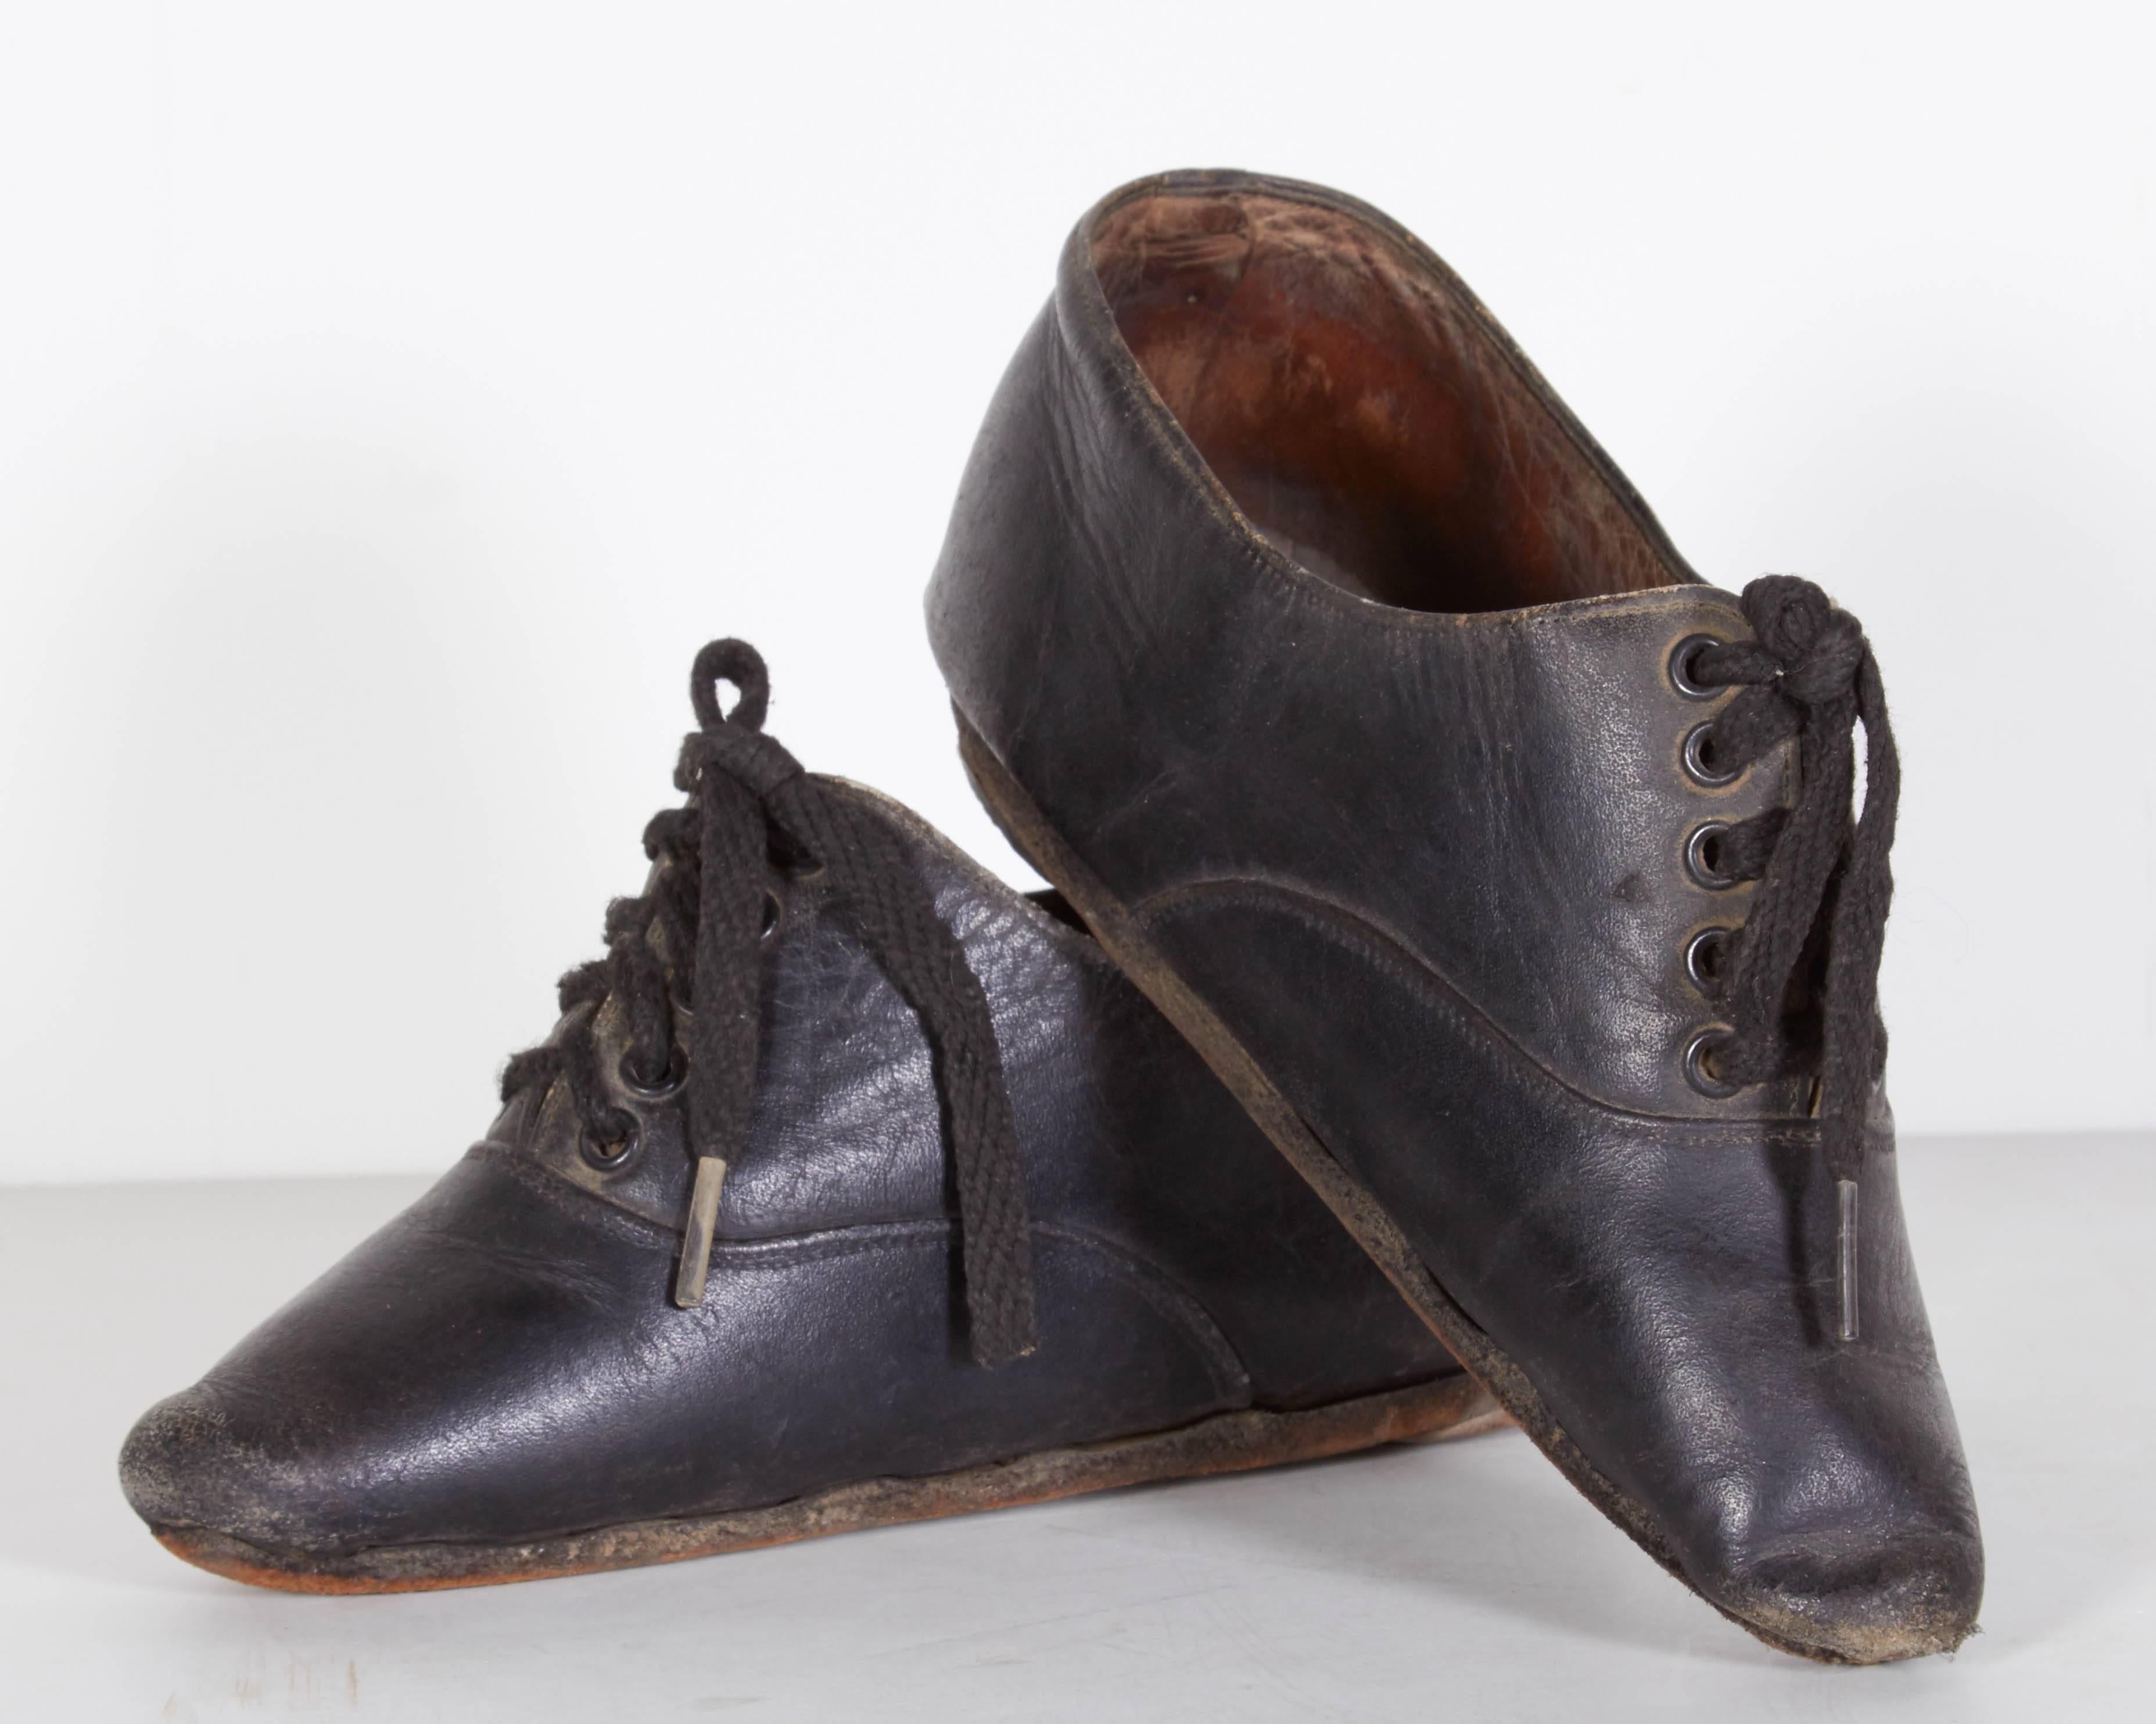 Tiny 19th Century Chinese Women's Leather Shoes In Good Condition For Sale In New York, NY